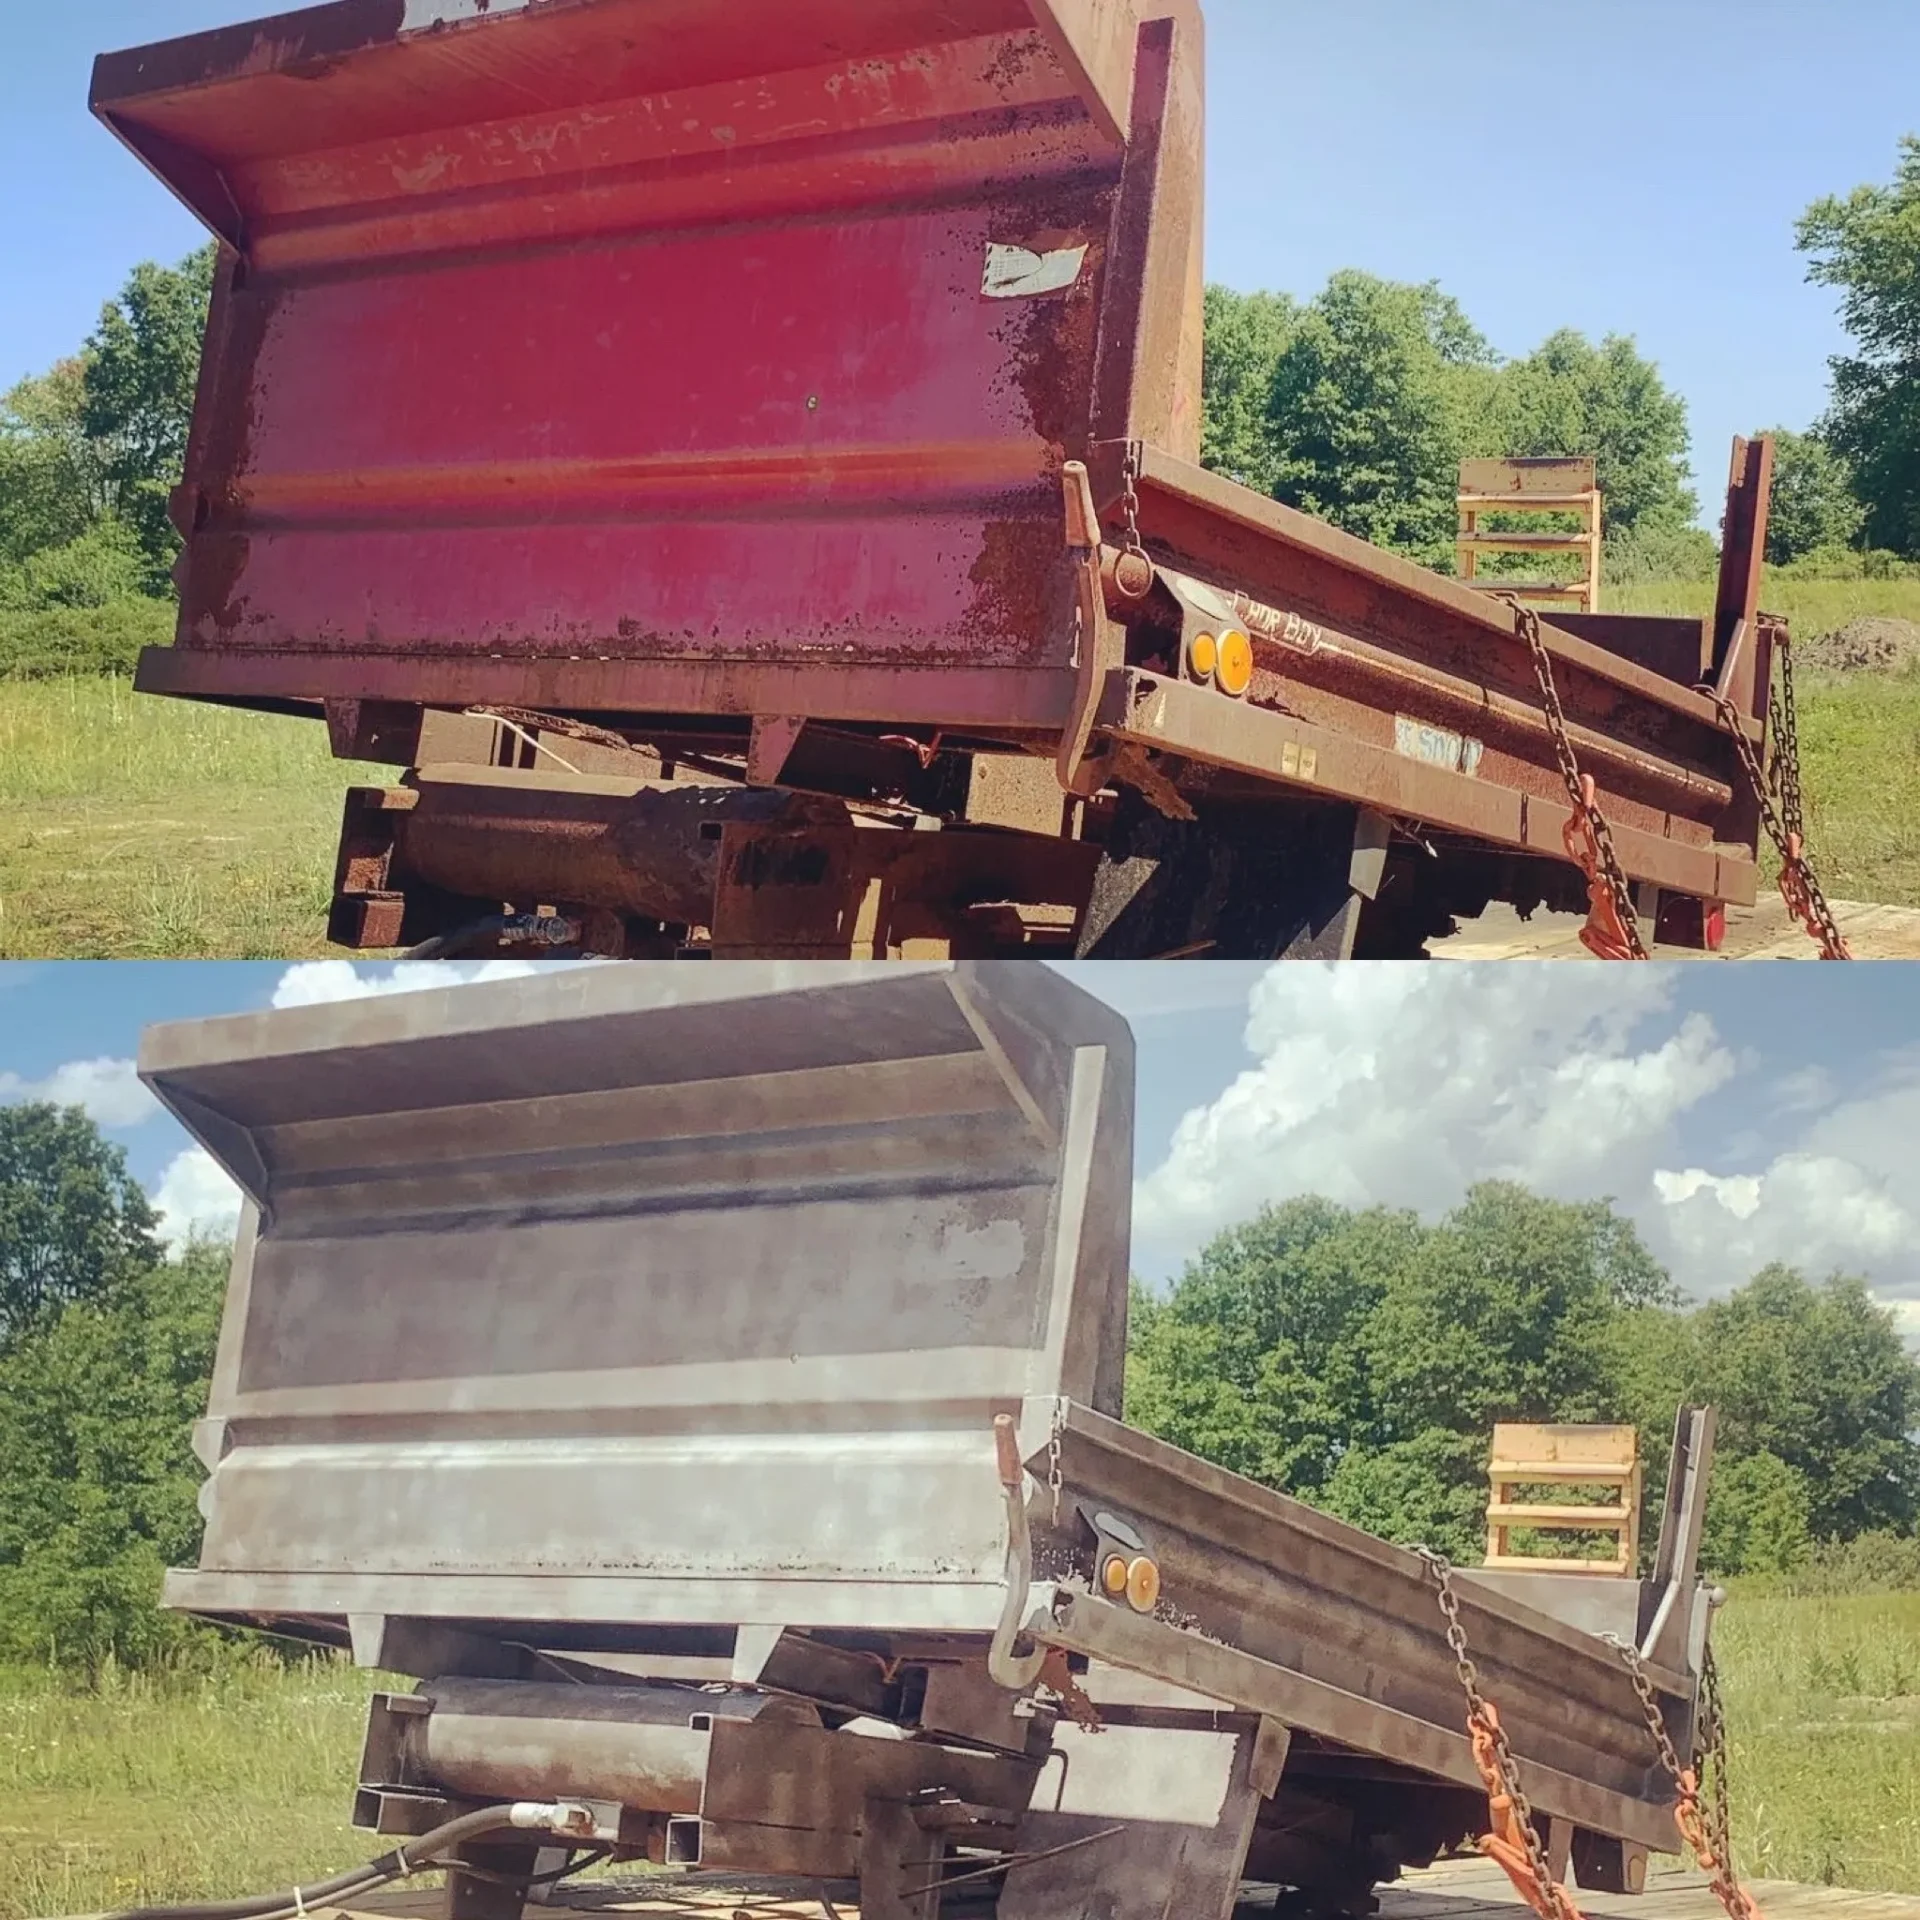 A before and after picture of the back end of a dump truck.